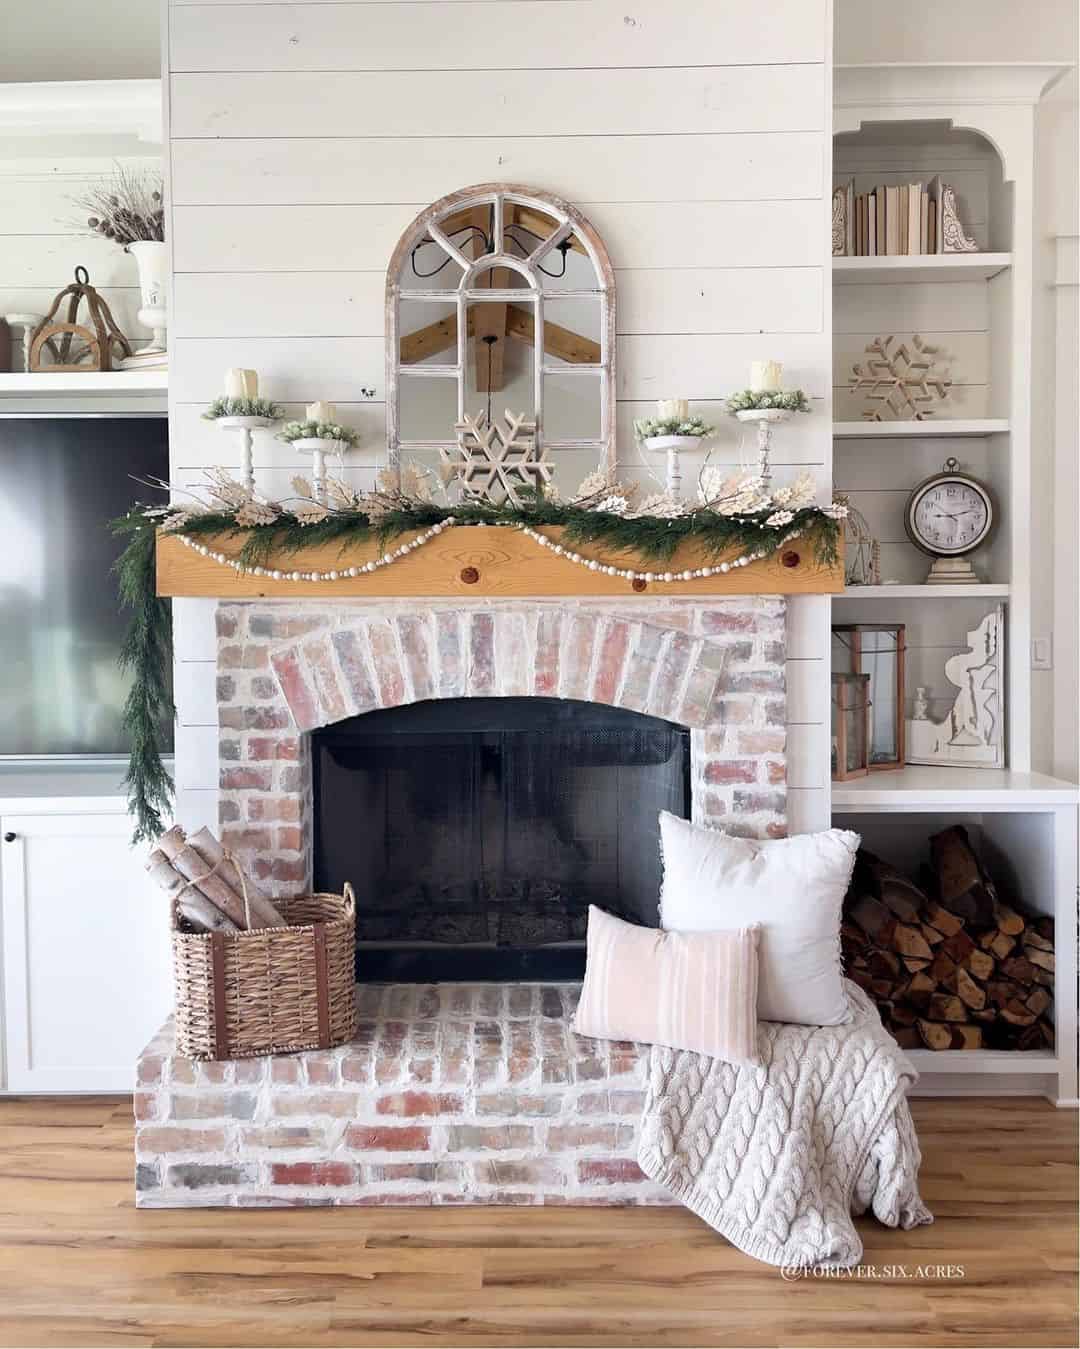 Wood Christmas Decorations for Fireplace Mantel - Soul & Lane